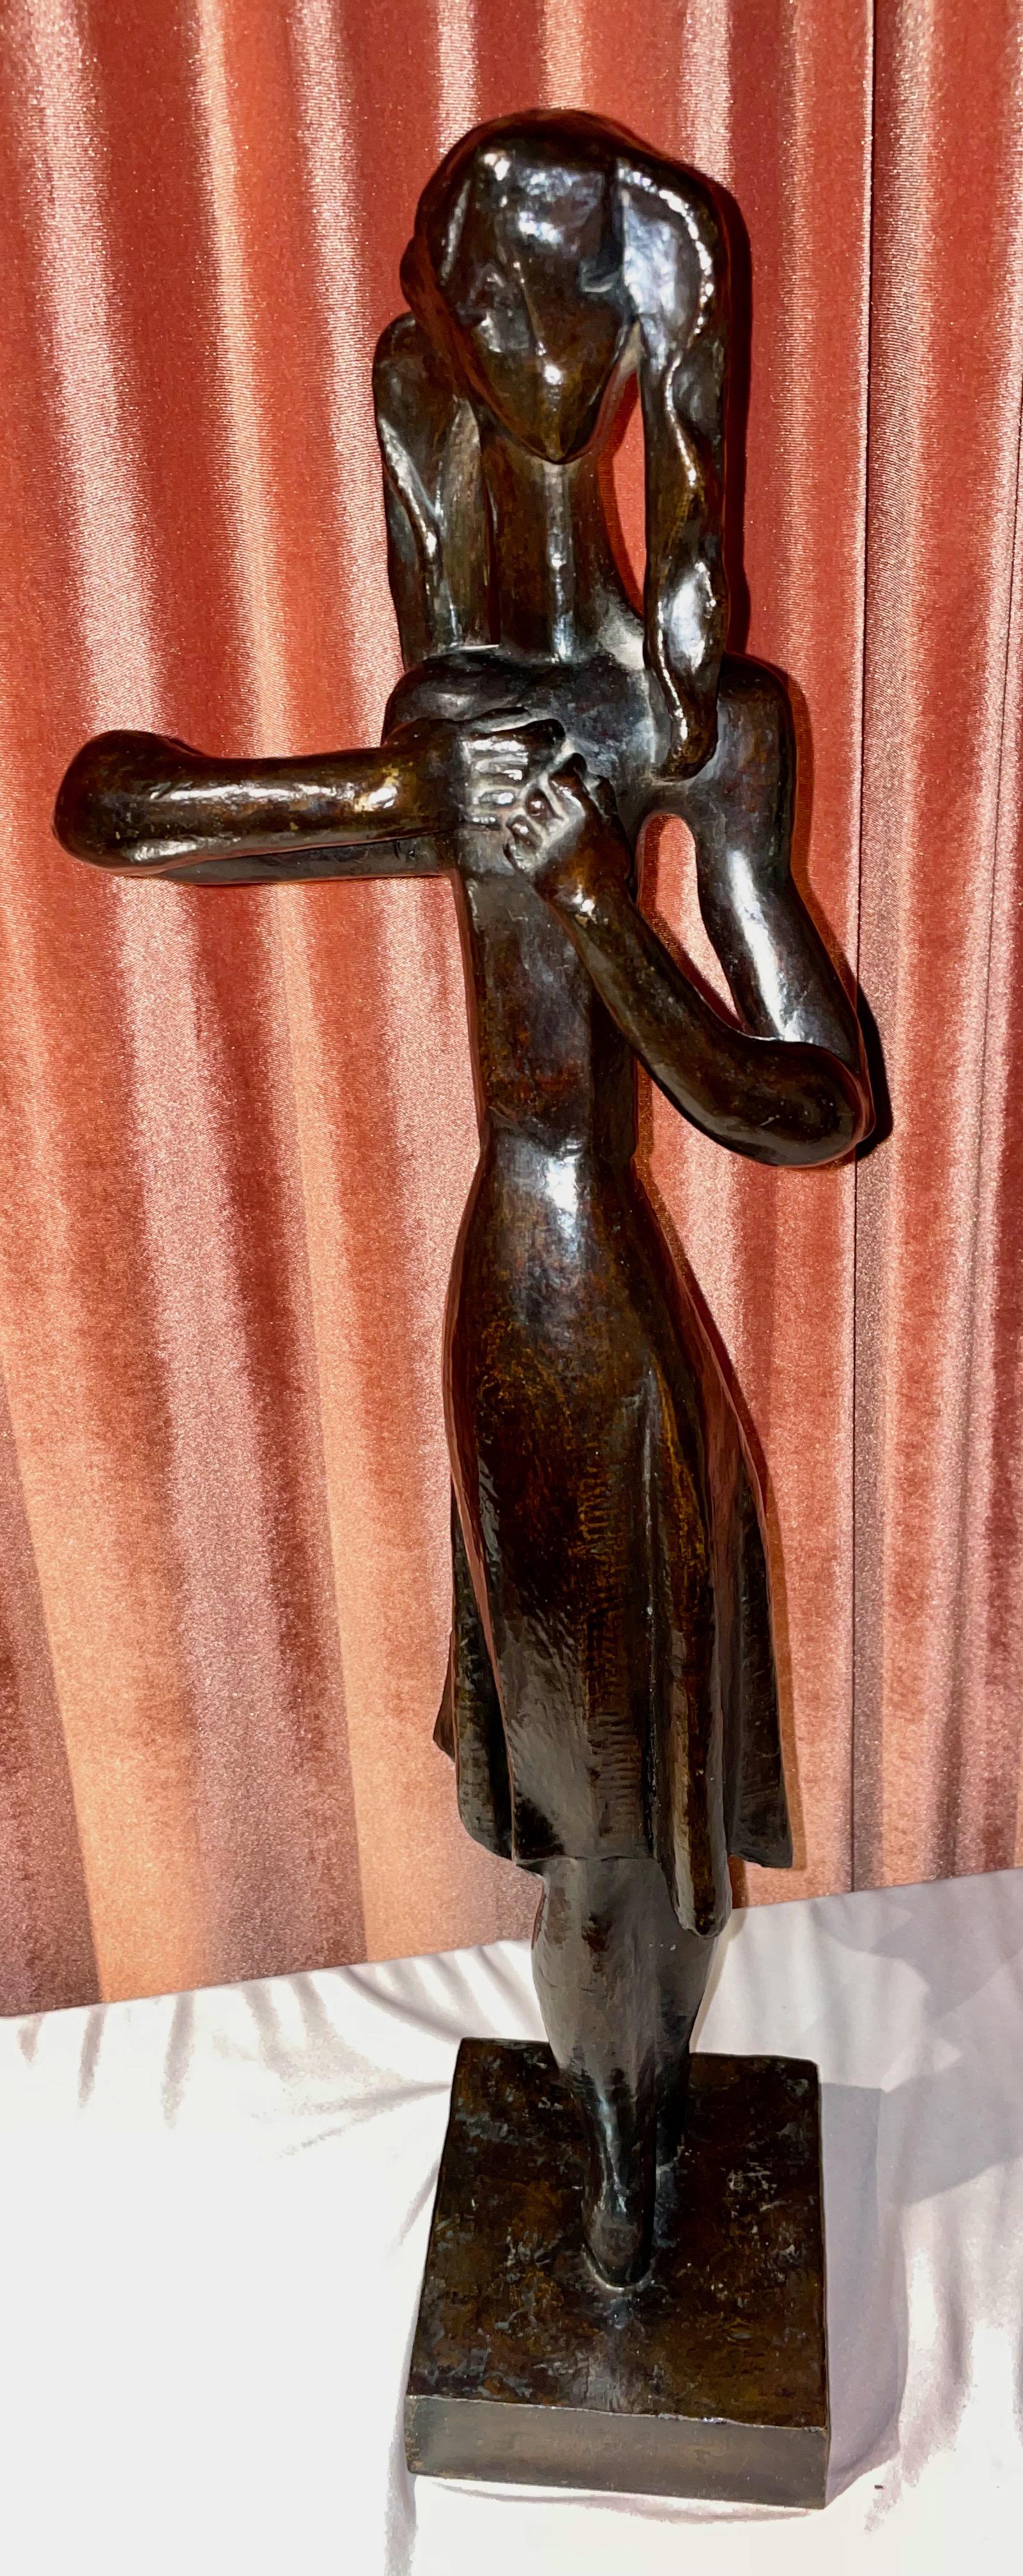 A rare bronze sculpture by one of the very first and most important artists to explore and popularize Cubism in the early 20th Century, Jospeh Csaky. Born in Hungary in 1888 and educated in the arts in Paris, he was a prolific sculptor, painter and